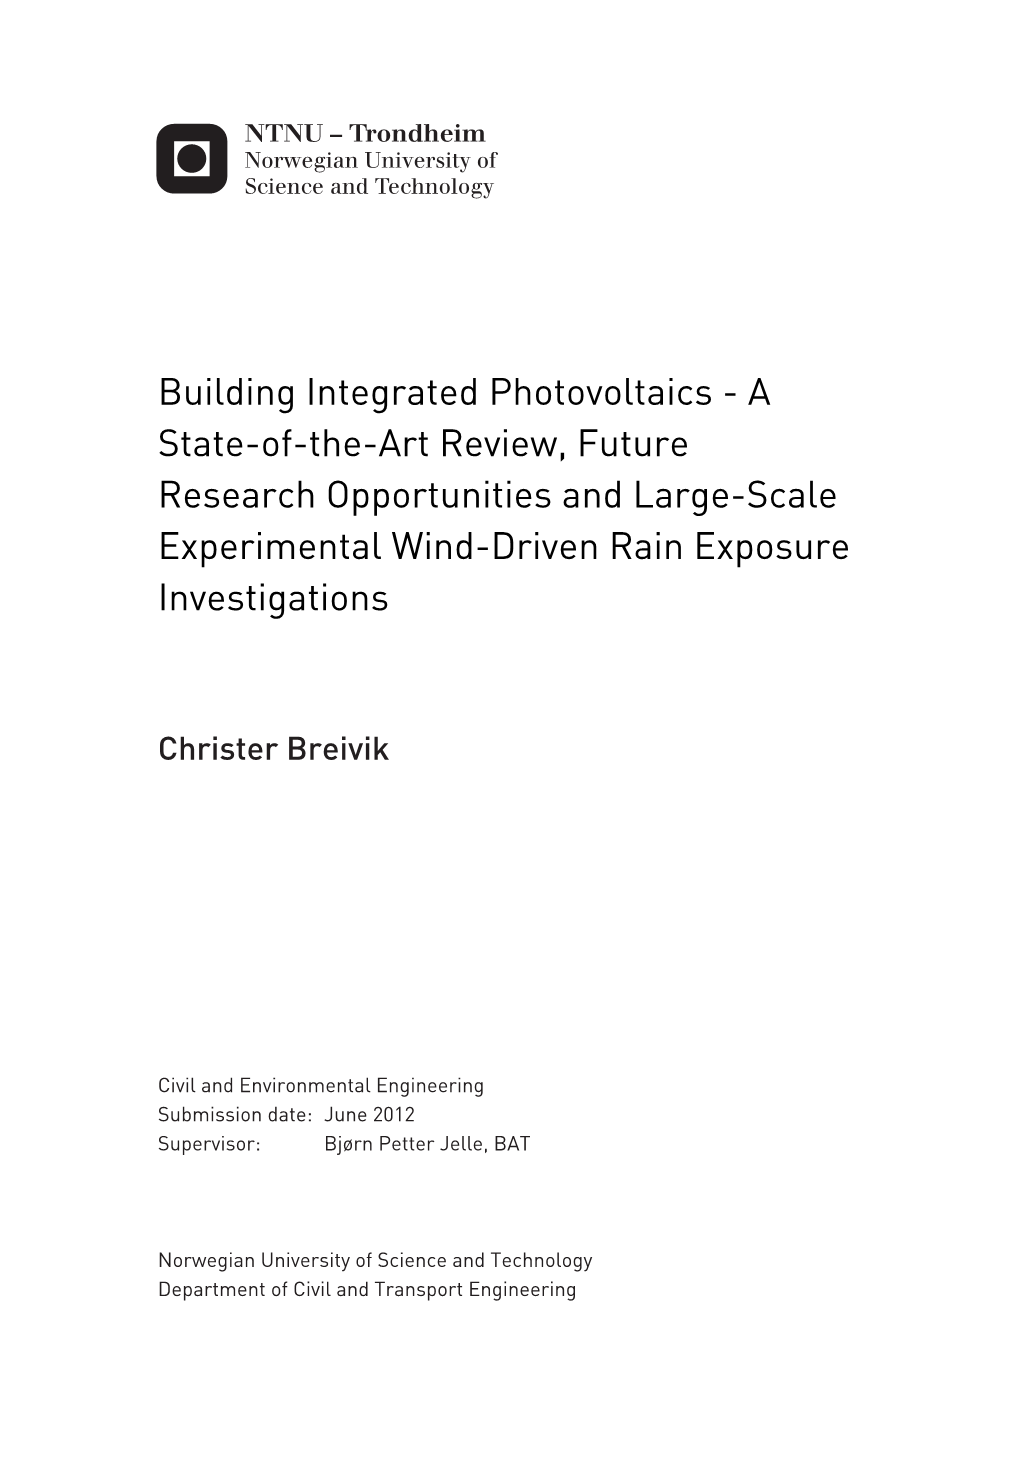 Building Integrated Photovoltaics - a State-Of-The-Art Review, Future Research Opportunities and Large-Scale Experimental Wind-Driven Rain Exposure Investigations